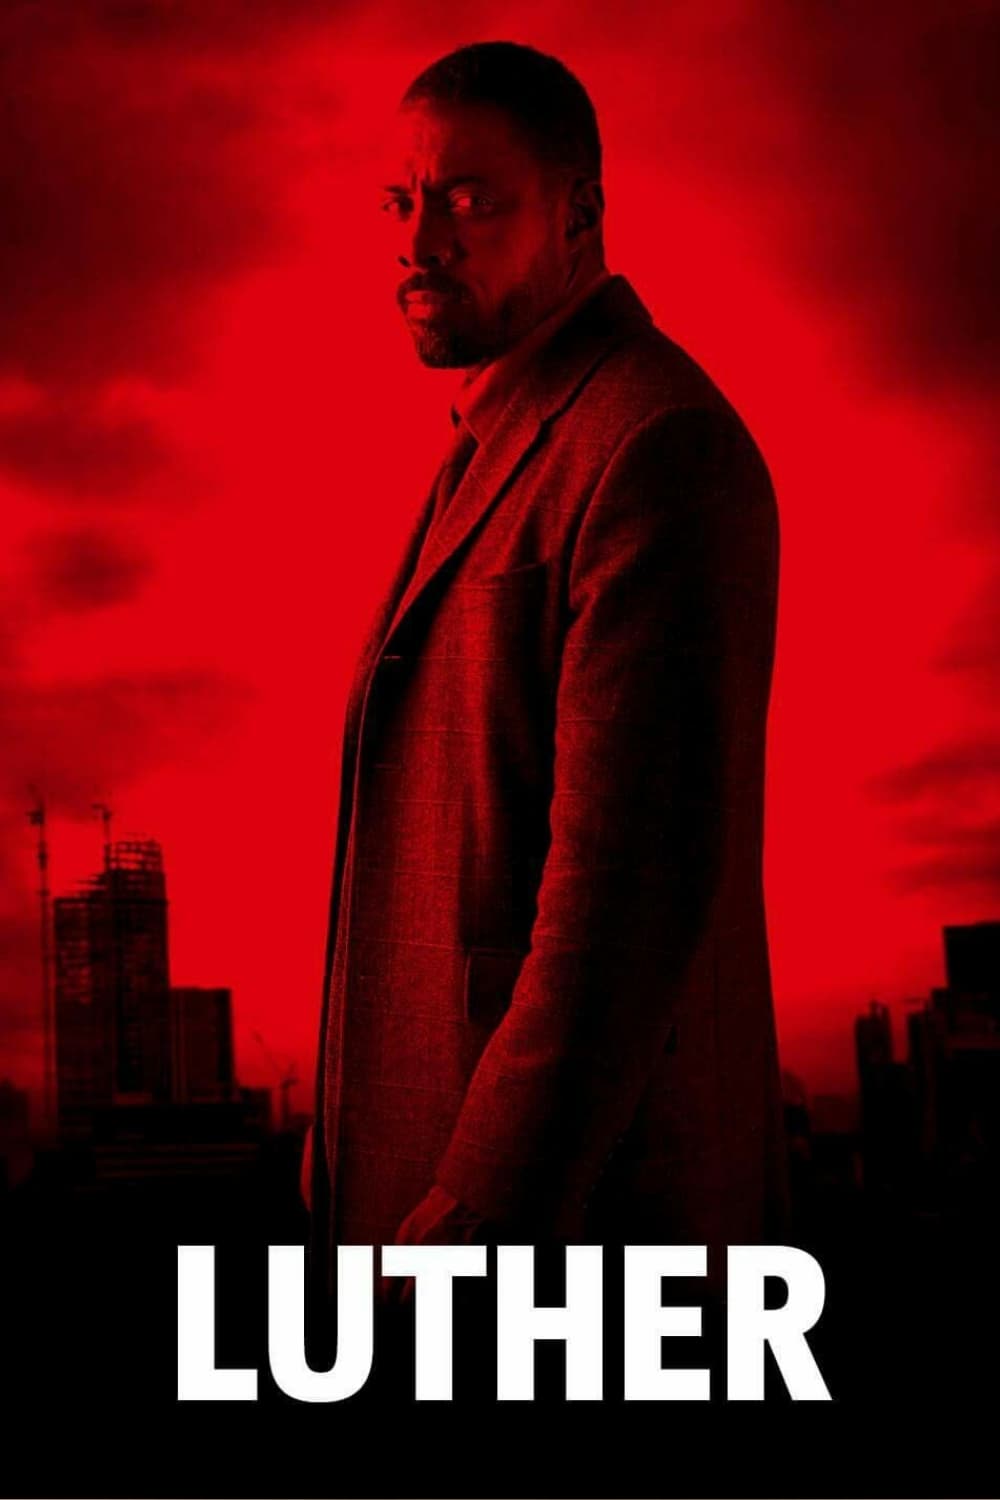 poster for LUTHER: The Fallen Sun